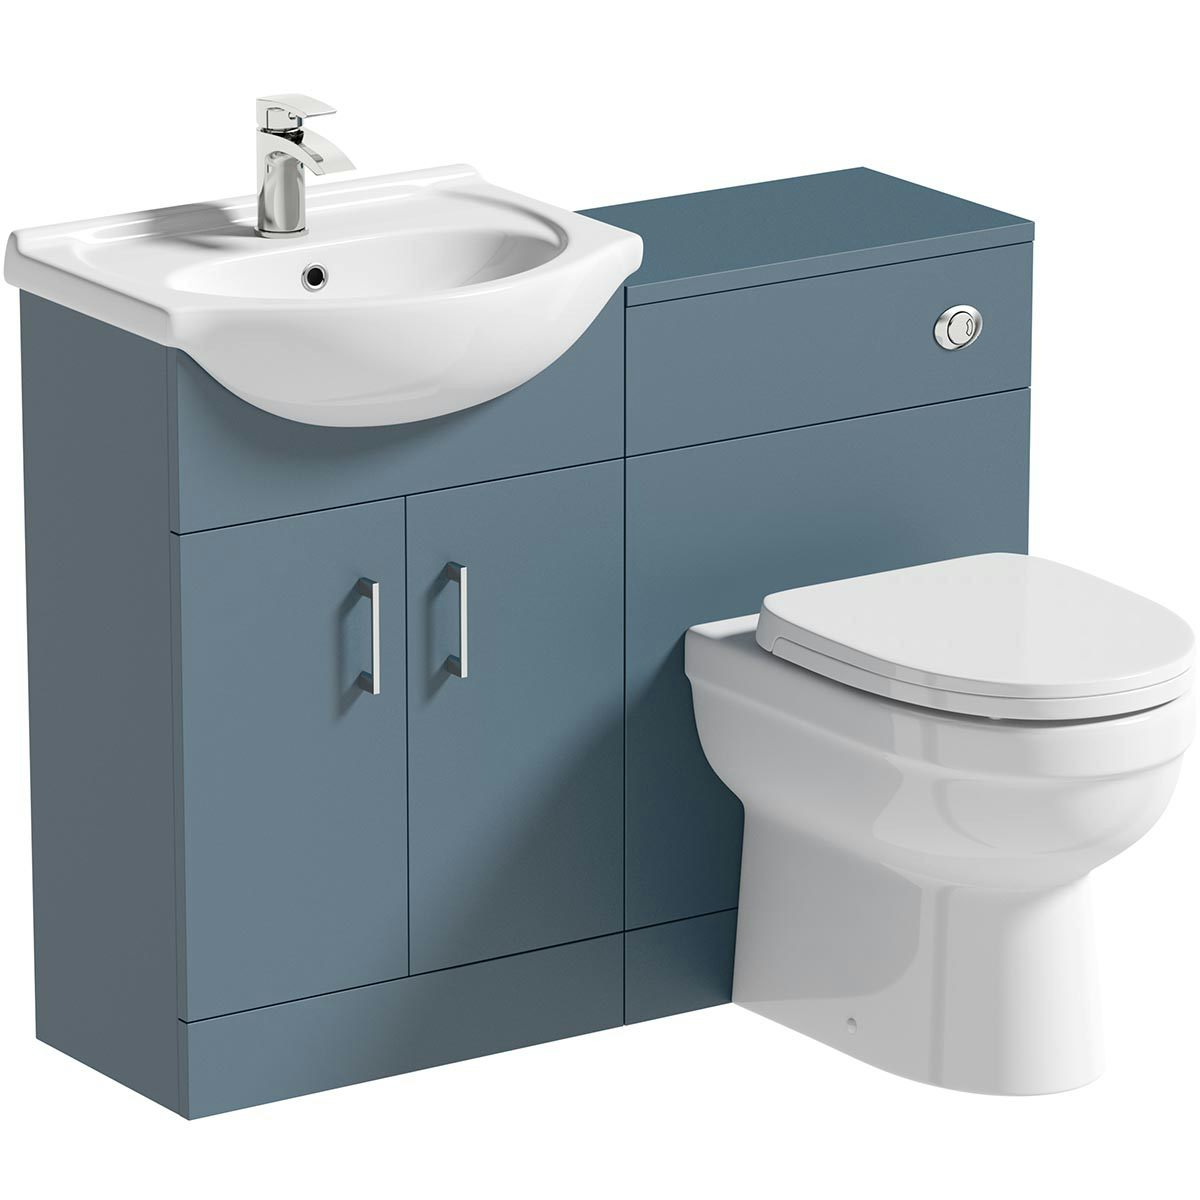 Orchard Lea ocean blue 1060mm combination and Eden back to wall toilet with seat